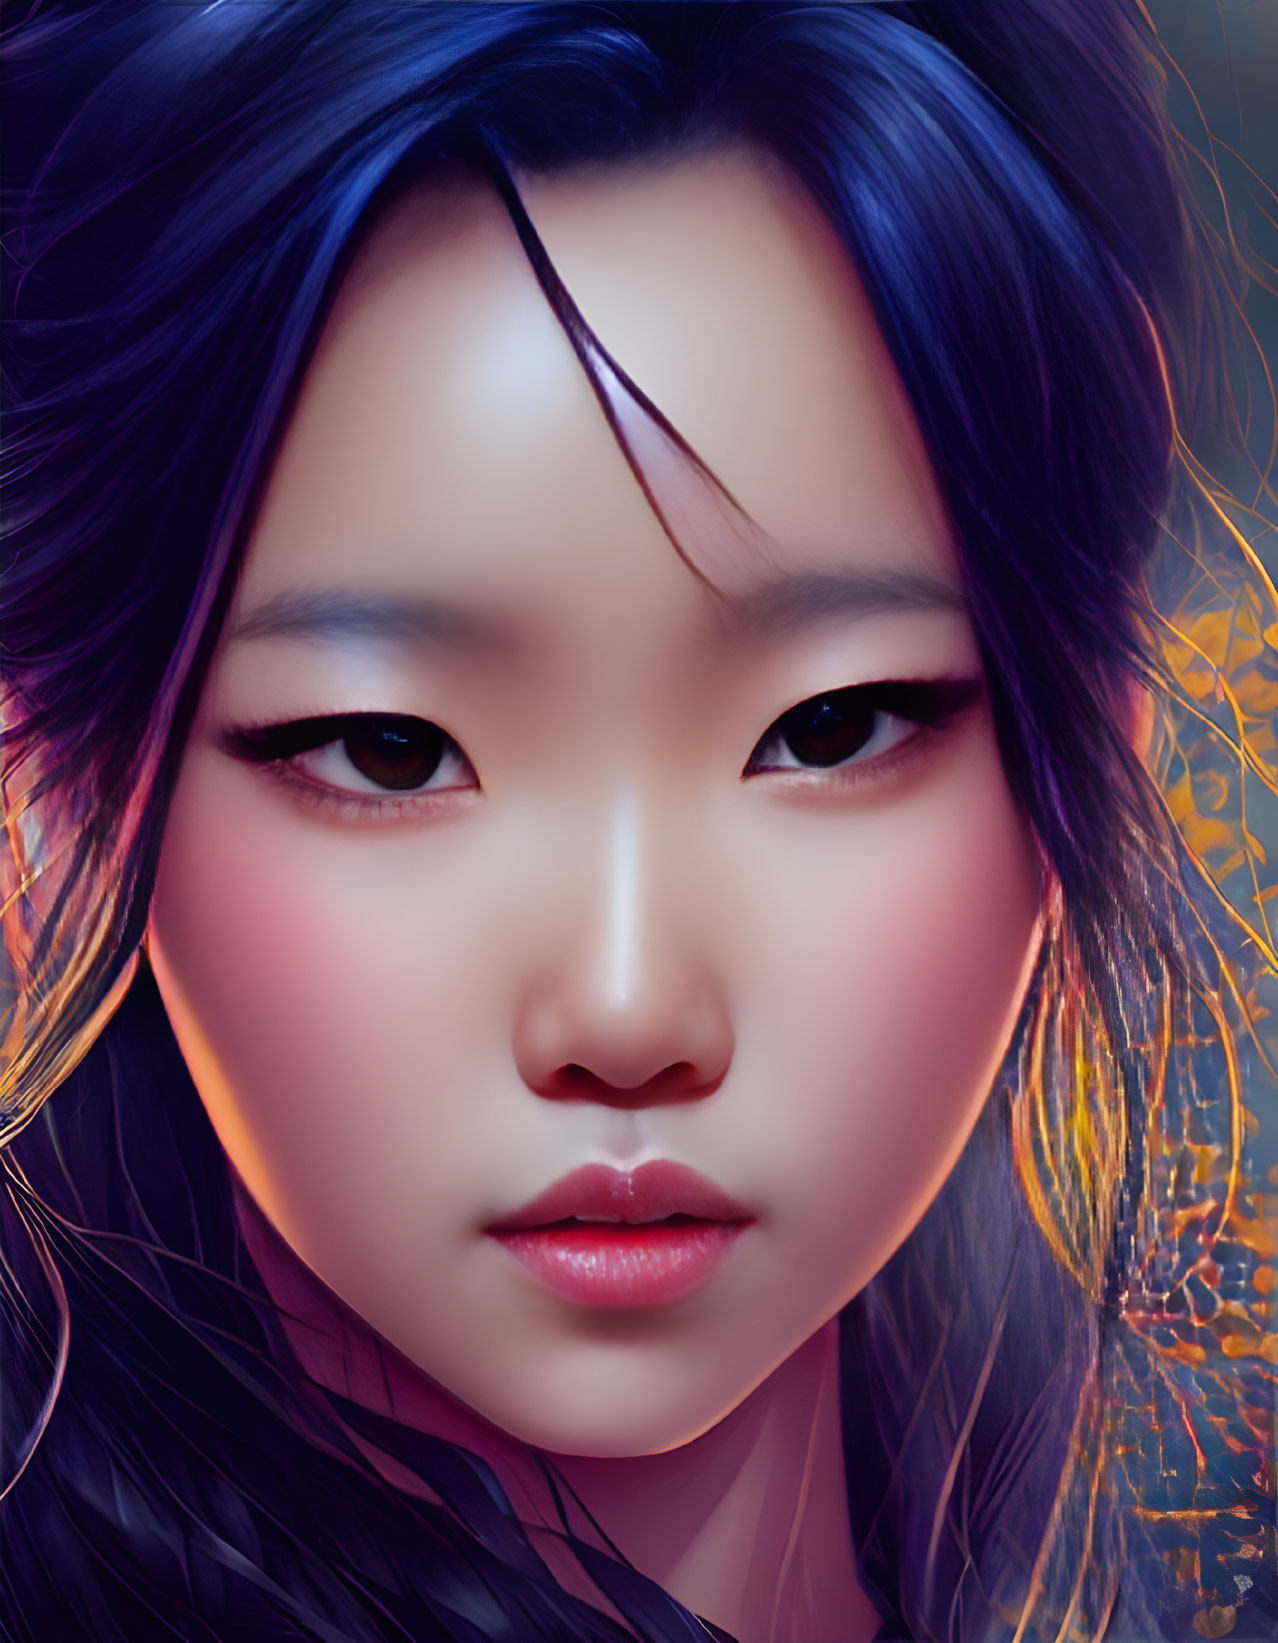 Illustrated female face with vibrant blue hair and bold eyeliner